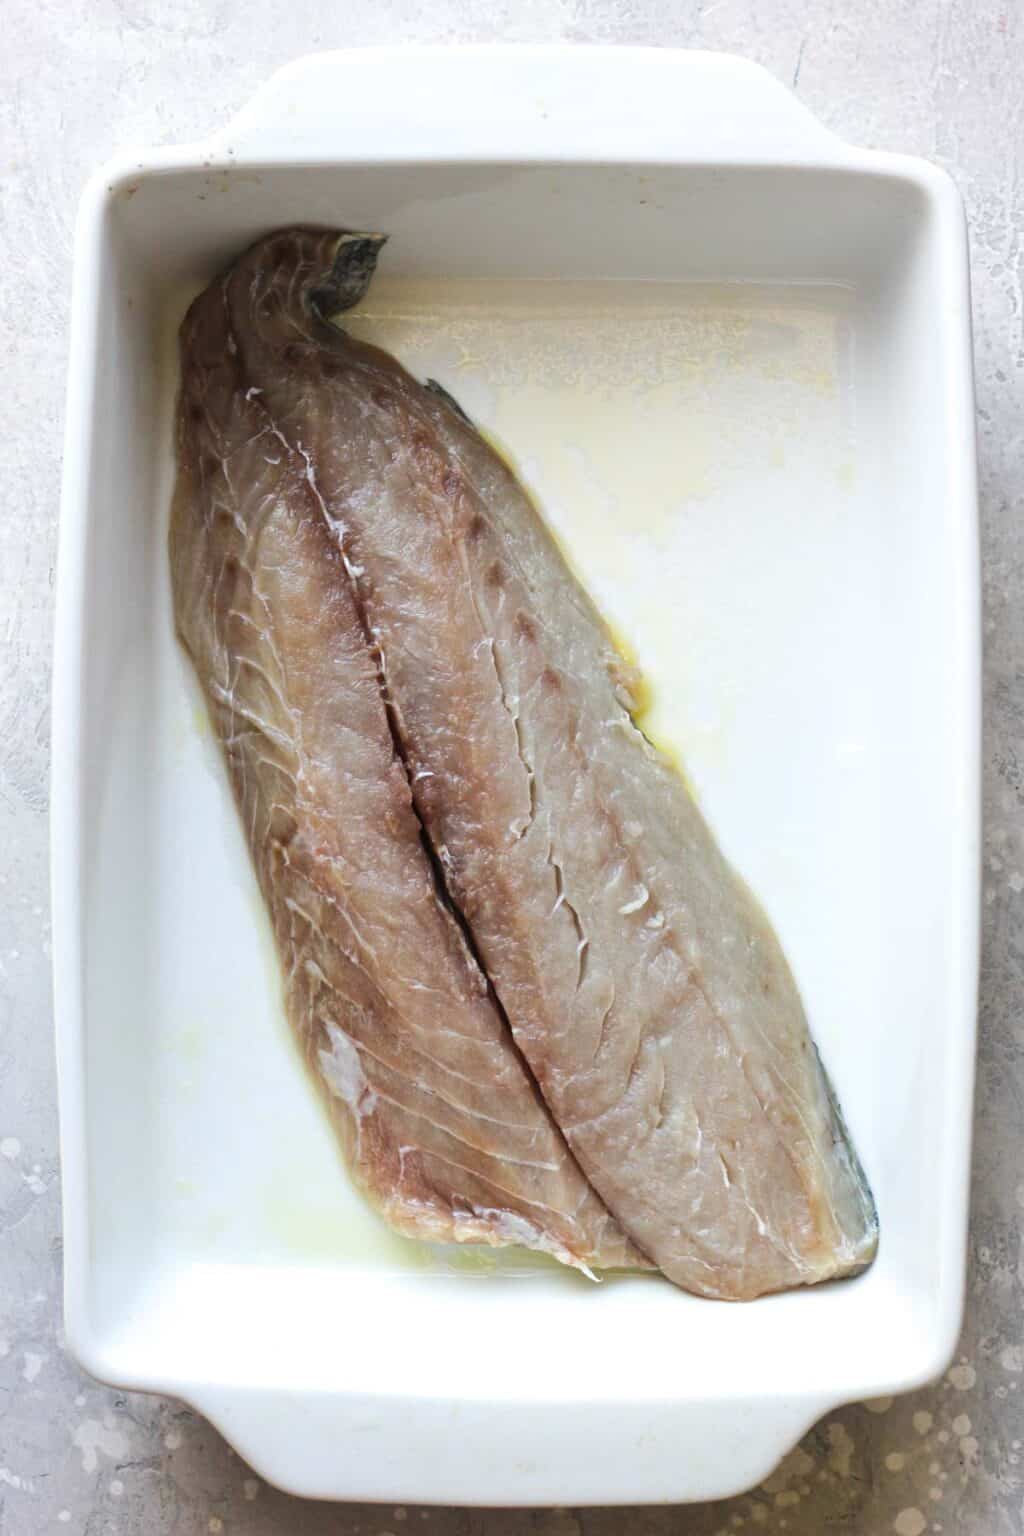 Easy oven baked bluefish recipe - The Top Meal